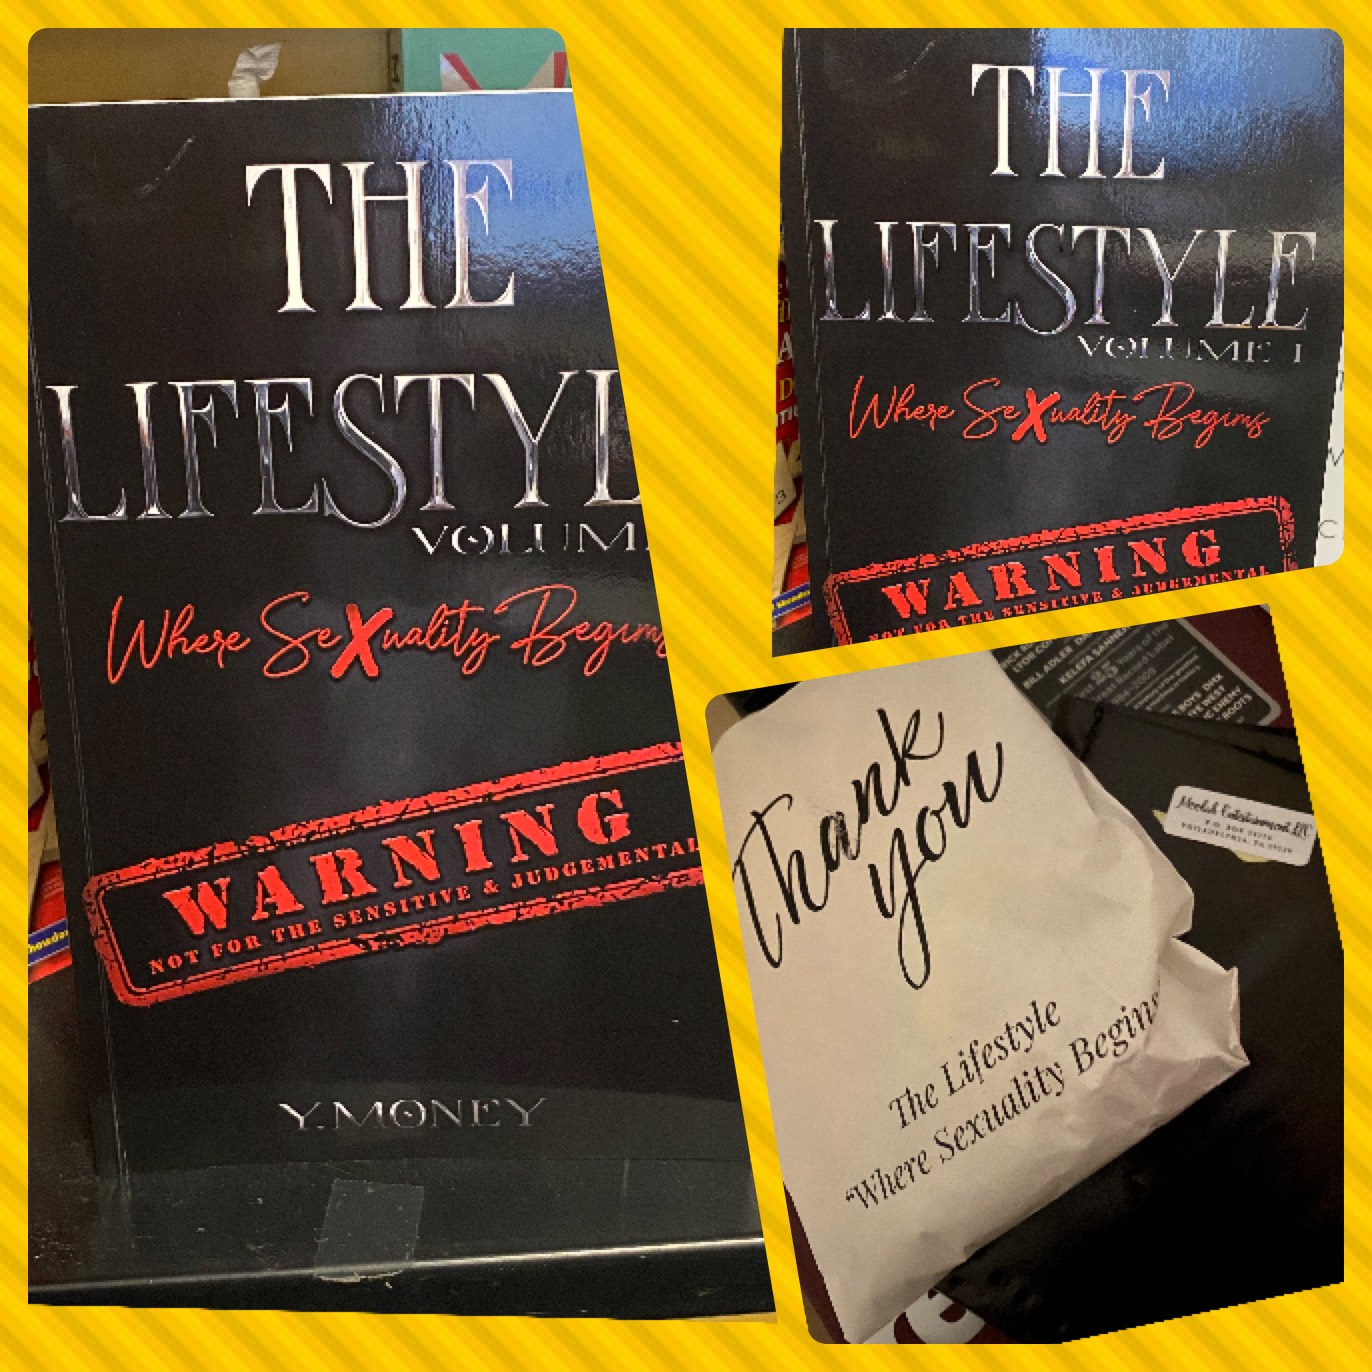 🚨NEW HIP HOP BOOK ALERT🚨 “THE LIFESTYLE” When Sexuality Begins” By Philly’s own “Monica Kitt Yvette Money”